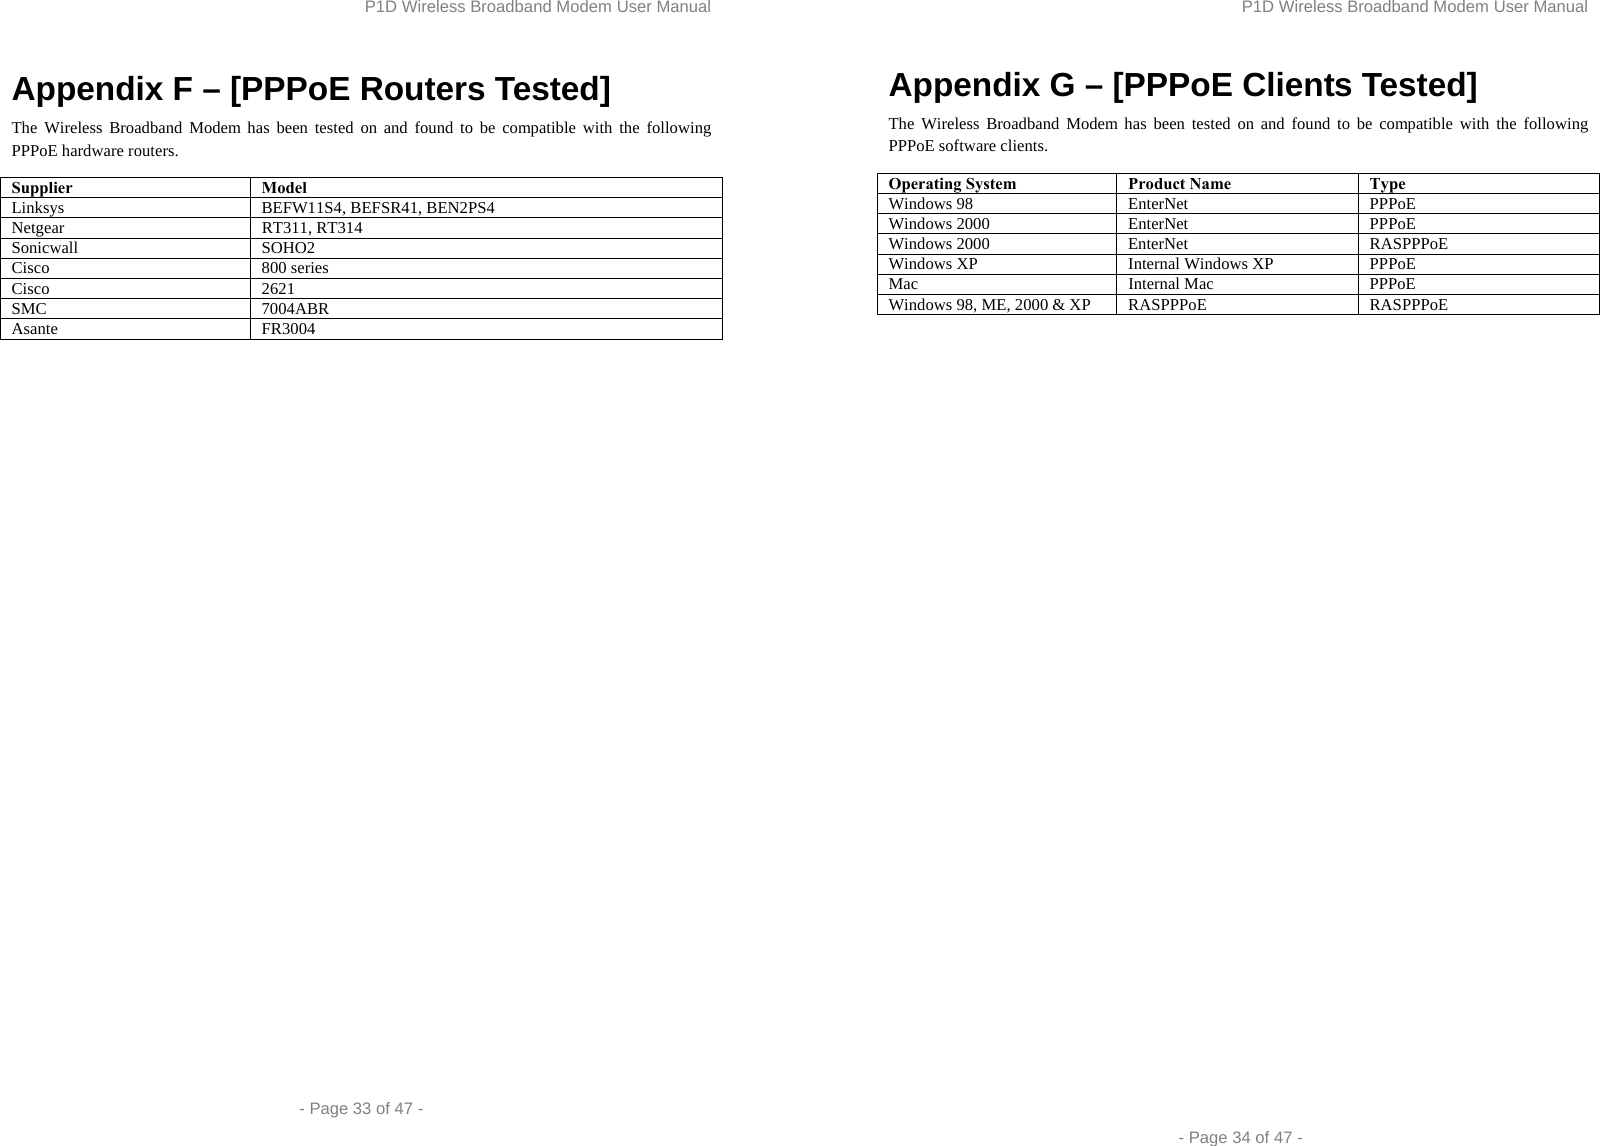 P1D Wireless Broadband Modem User Manual  - Page 33 of 47 -  Appendix F – [PPPoE Routers Tested] The Wireless Broadband Modem has been tested on and found to be compatible with the following PPPoE hardware routers. Supplier Model Linksys  BEFW11S4, BEFSR41, BEN2PS4 Netgear RT311, RT314 Sonicwall SOHO2 Cisco 800 series Cisco 2621 SMC 7004ABR Asante FR3004 P1D Wireless Broadband Modem User Manual  - Page 34 of 47 - Appendix G – [PPPoE Clients Tested] The Wireless Broadband Modem has been tested on and found to be compatible with the following PPPoE software clients. Operating System  Product Name  Type Windows 98  EnterNet  PPPoE Windows 2000  EnterNet  PPPoE Windows 2000  EnterNet  RASPPPoE Windows XP  Internal Windows XP  PPPoE Mac Internal Mac PPPoE Windows 98, ME, 2000 &amp; XP  RASPPPoE  RASPPPoE  